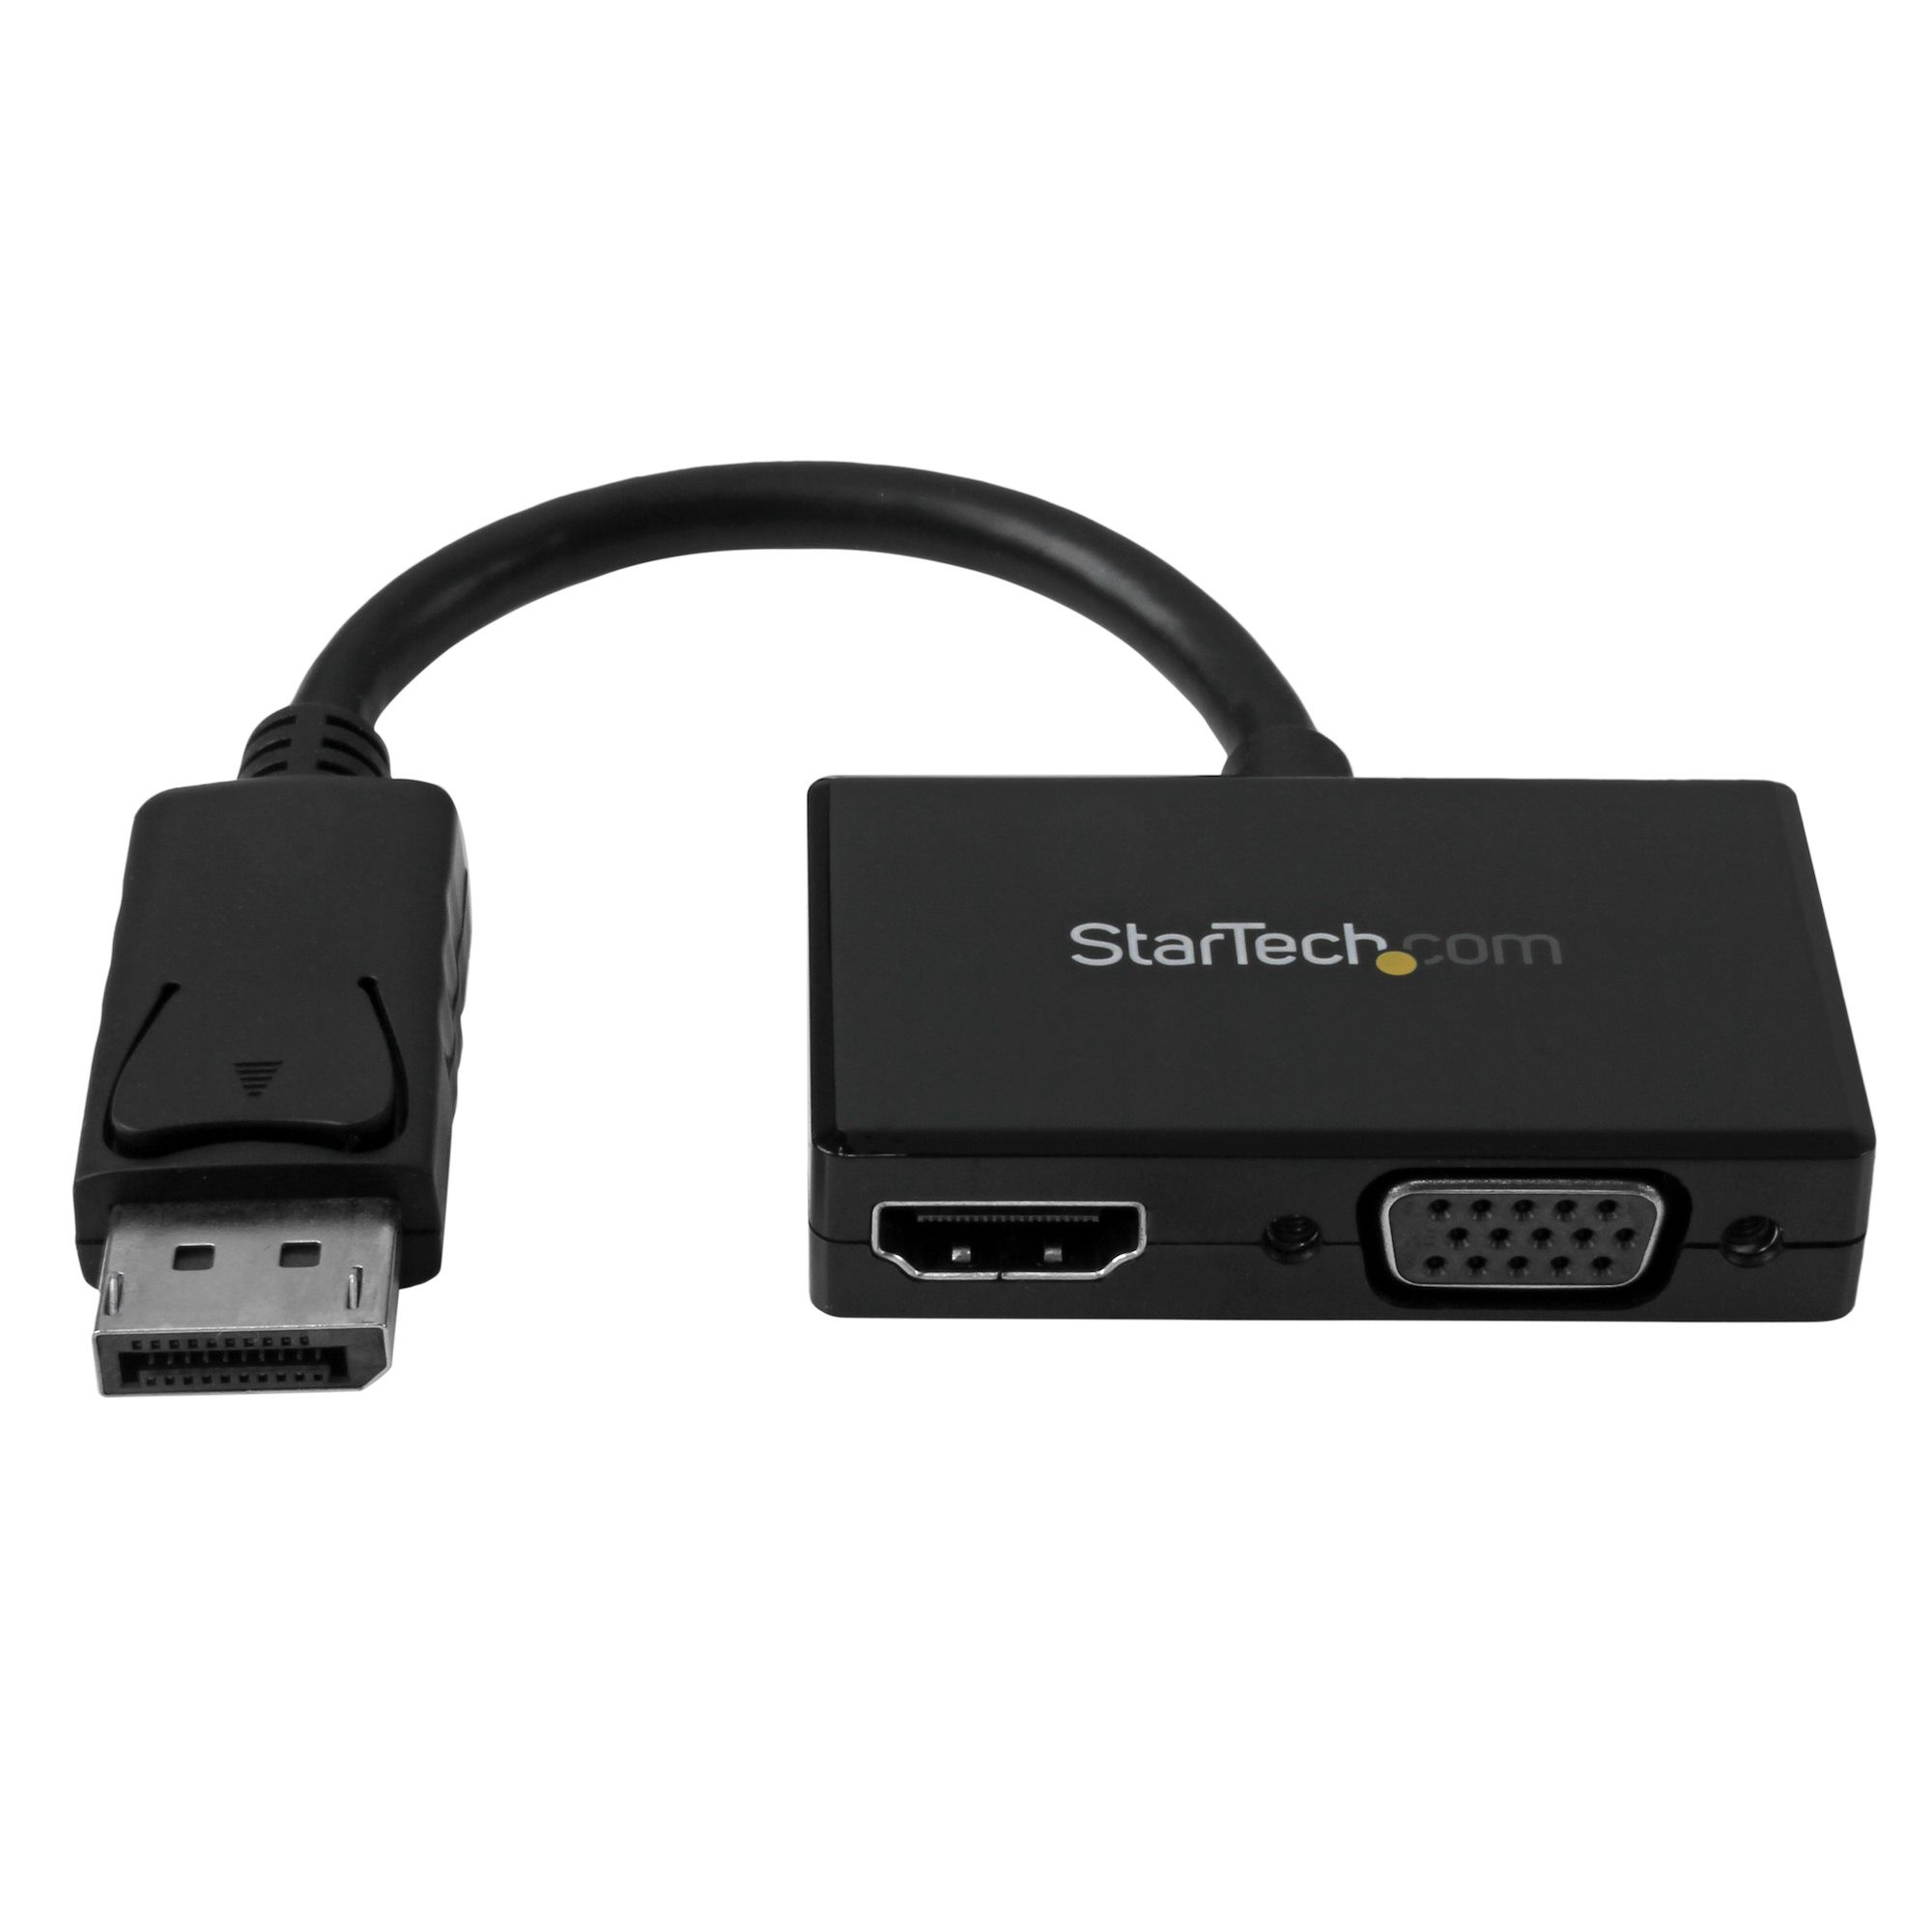 StarTech.com Travel A/V Adapter: 2-in-1 DisplayPort HDMI or VGA - Connect your DisplayPort equipped computer system to an HDMI or VGA display - Displayport to HDMI - DisplayPort to VGA -